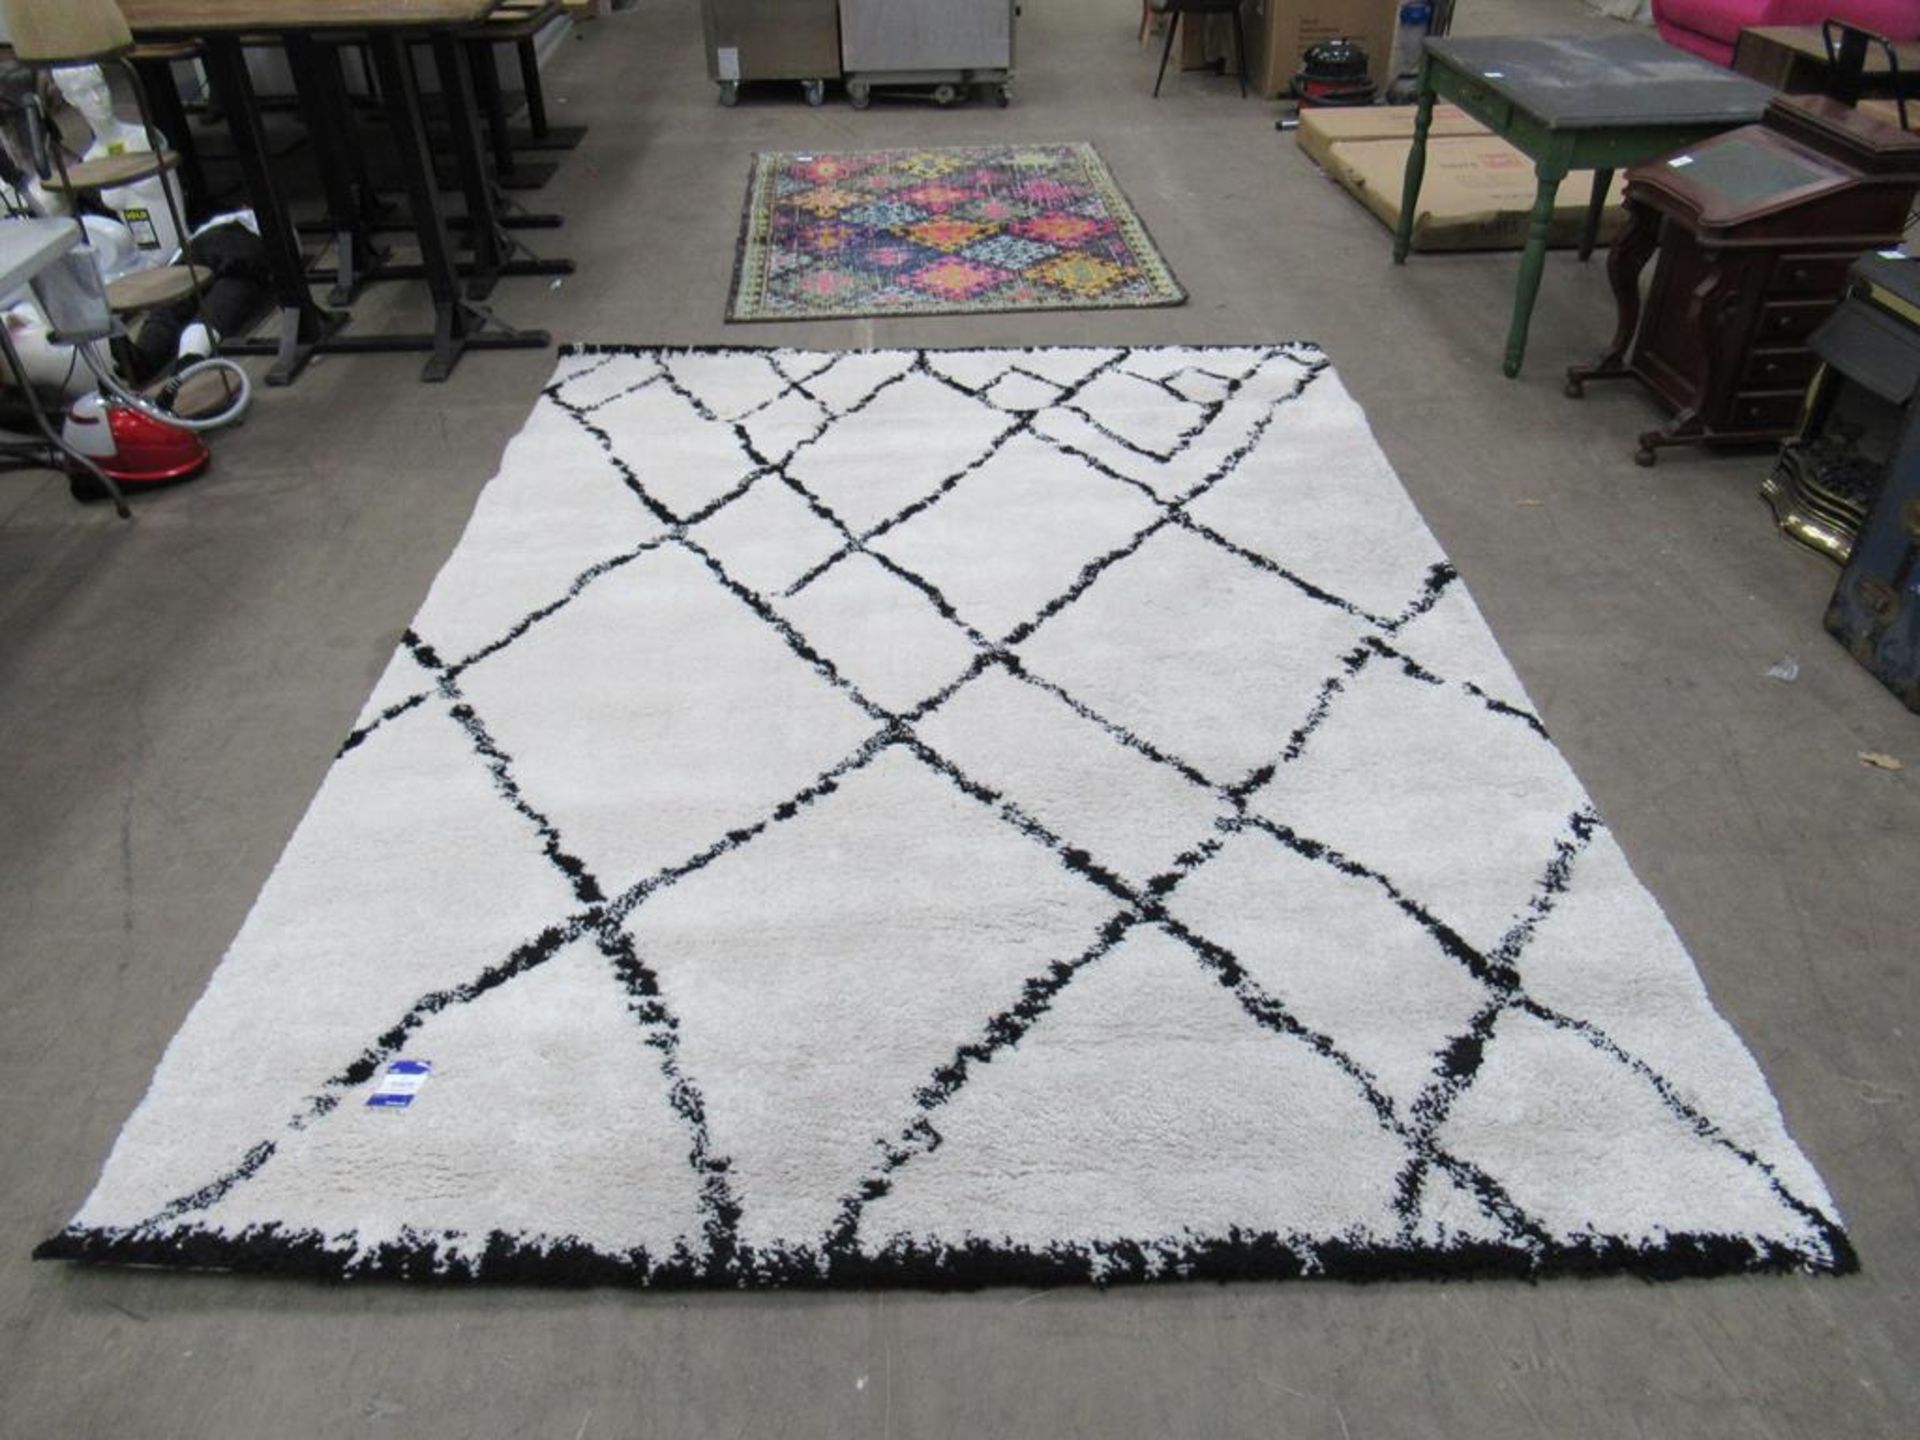 A LA Redoute "Royal Nordic Living" Cream and Black Rug - Image 2 of 3